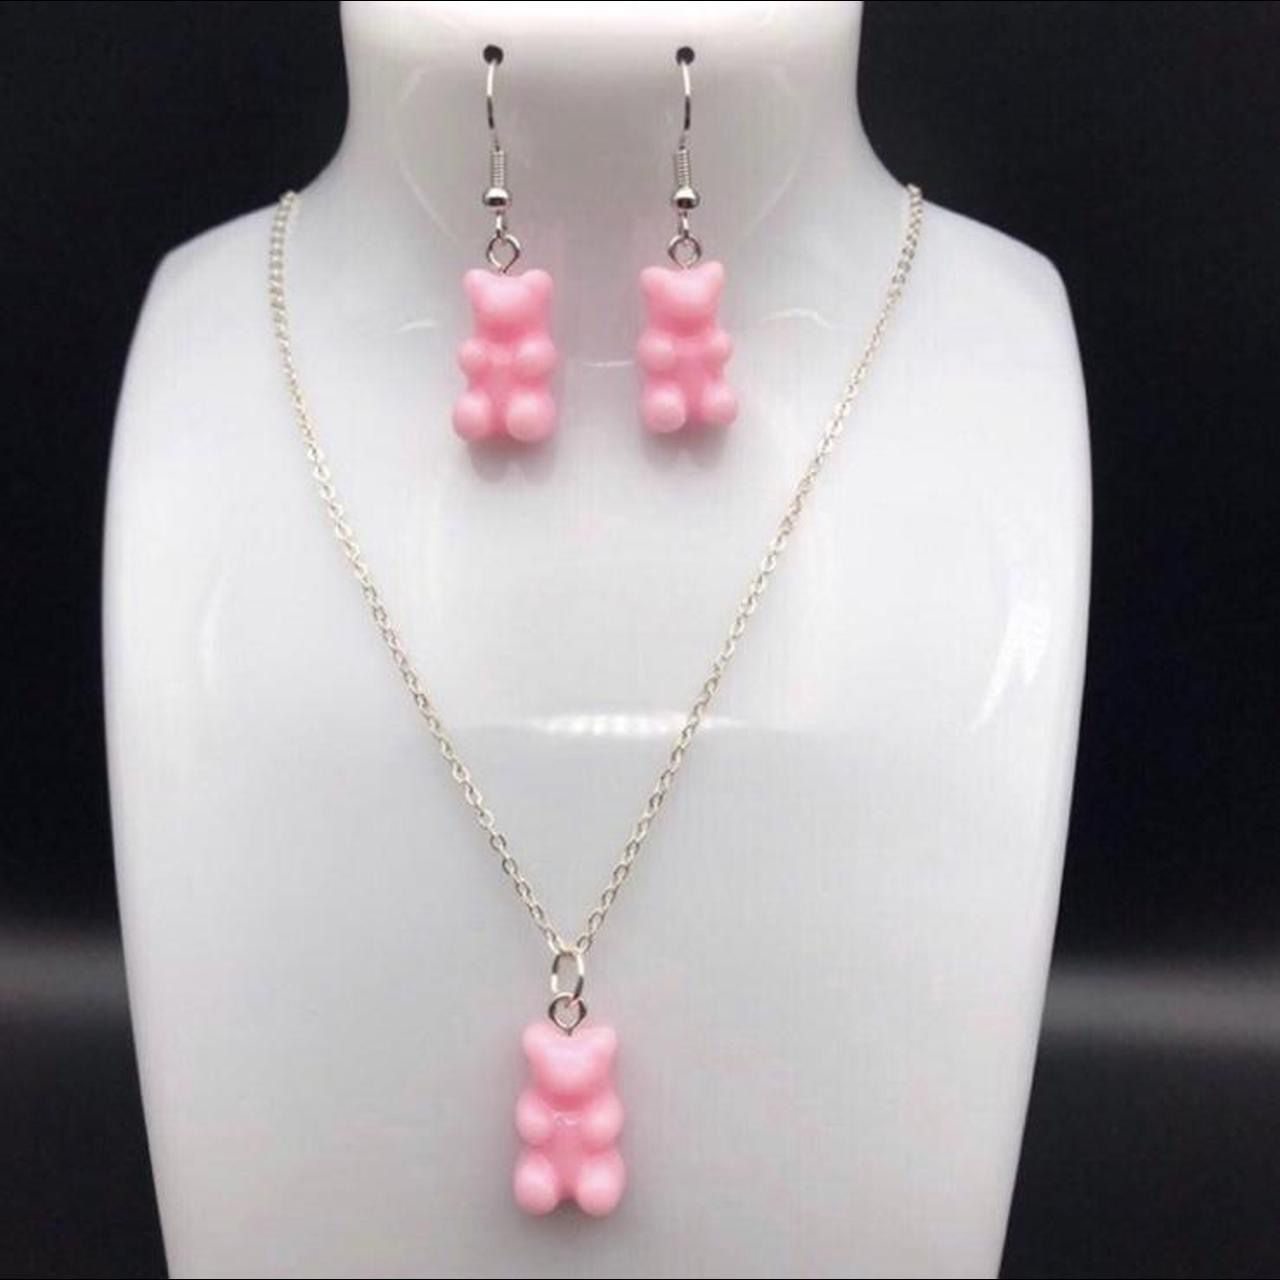 Pink Teddy Bear / Gummy Bear Jewelry Set- Includes Necklace and Earrings